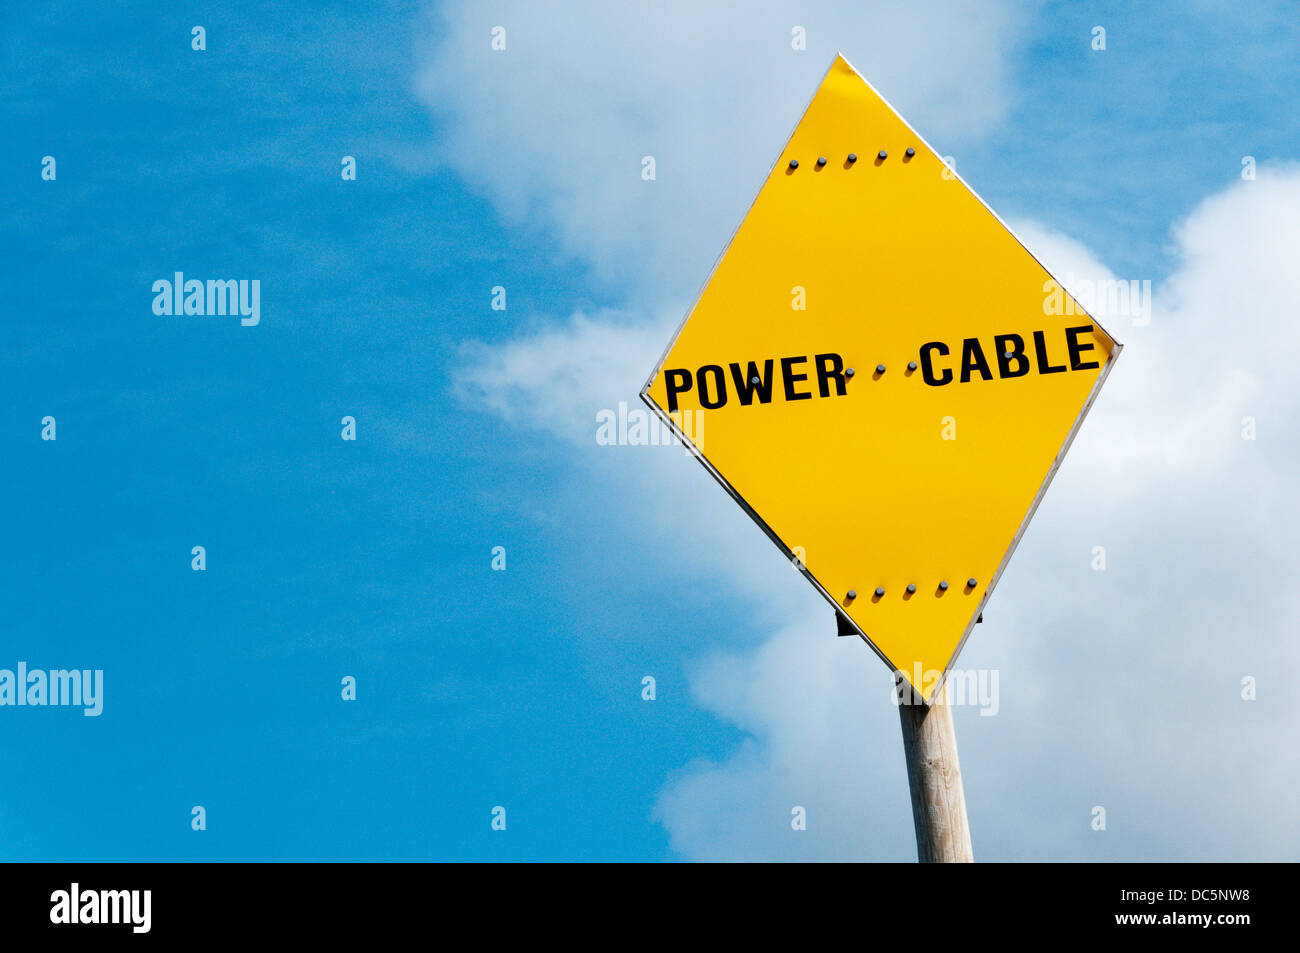 A yellow diamond-shaped Power Cable warning sign against a blue sky. Stock Photo